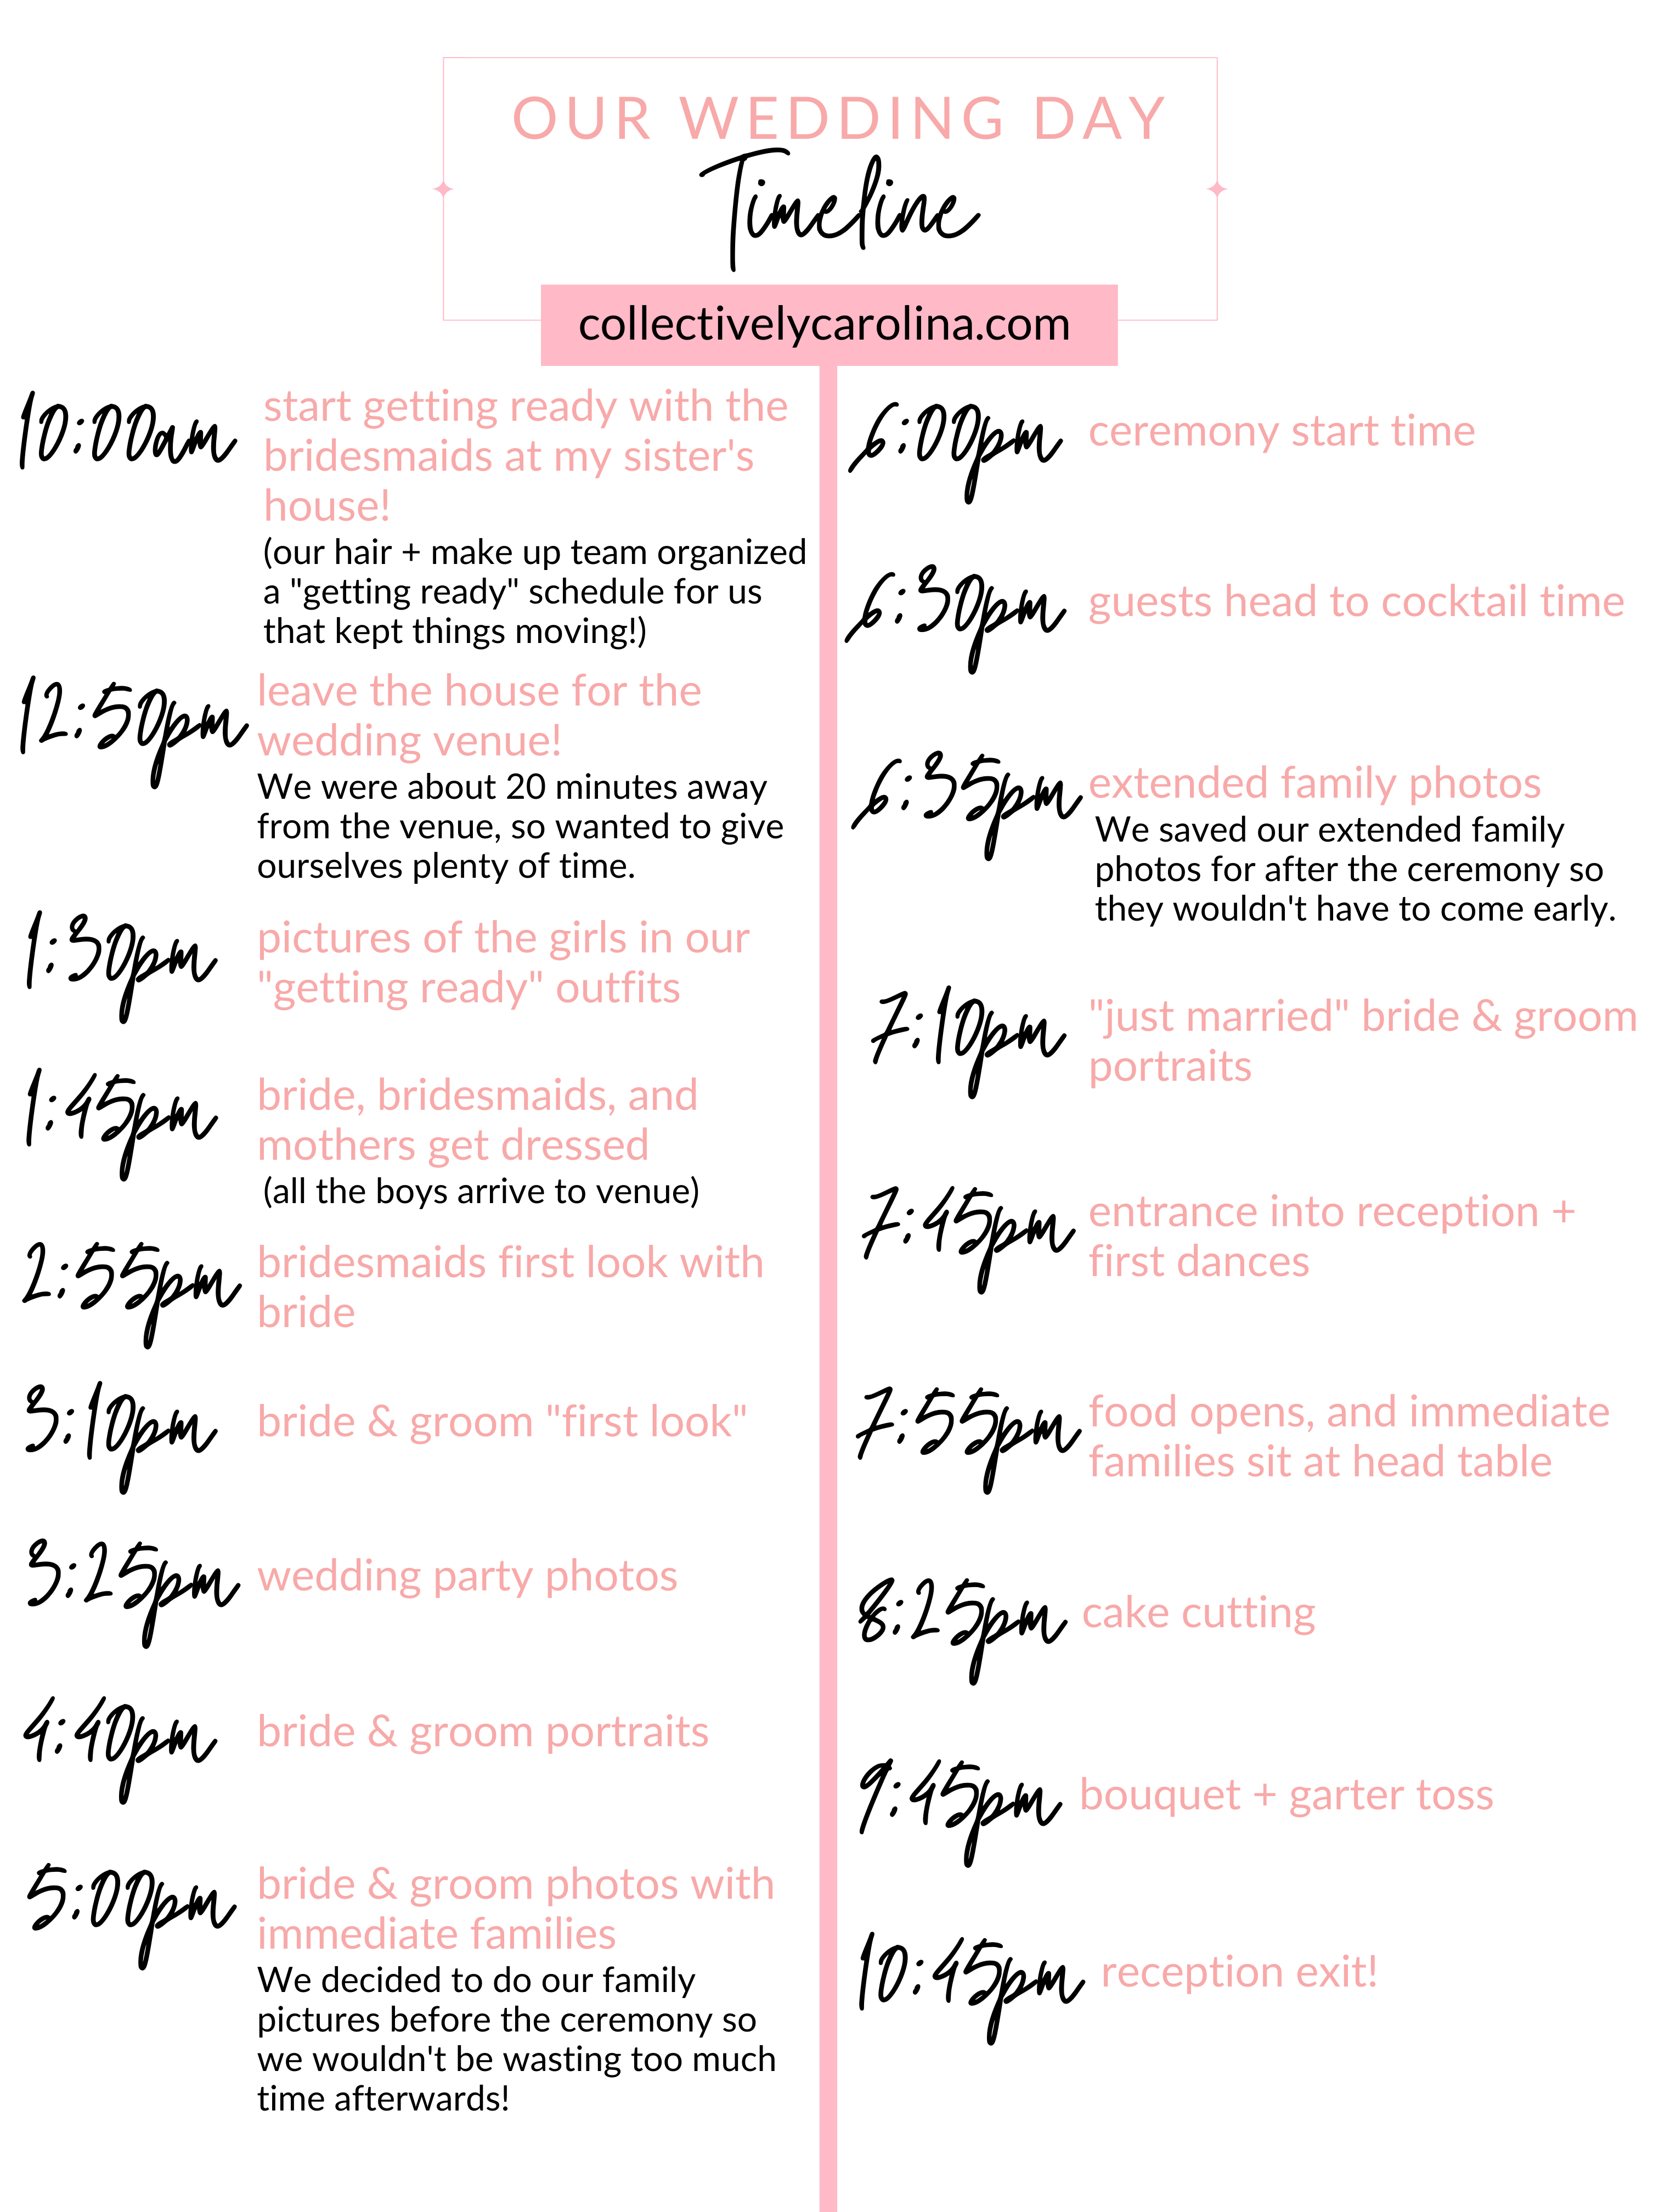 wedding-wednesday-no-27-our-day-of-timeline-collectively-carolina